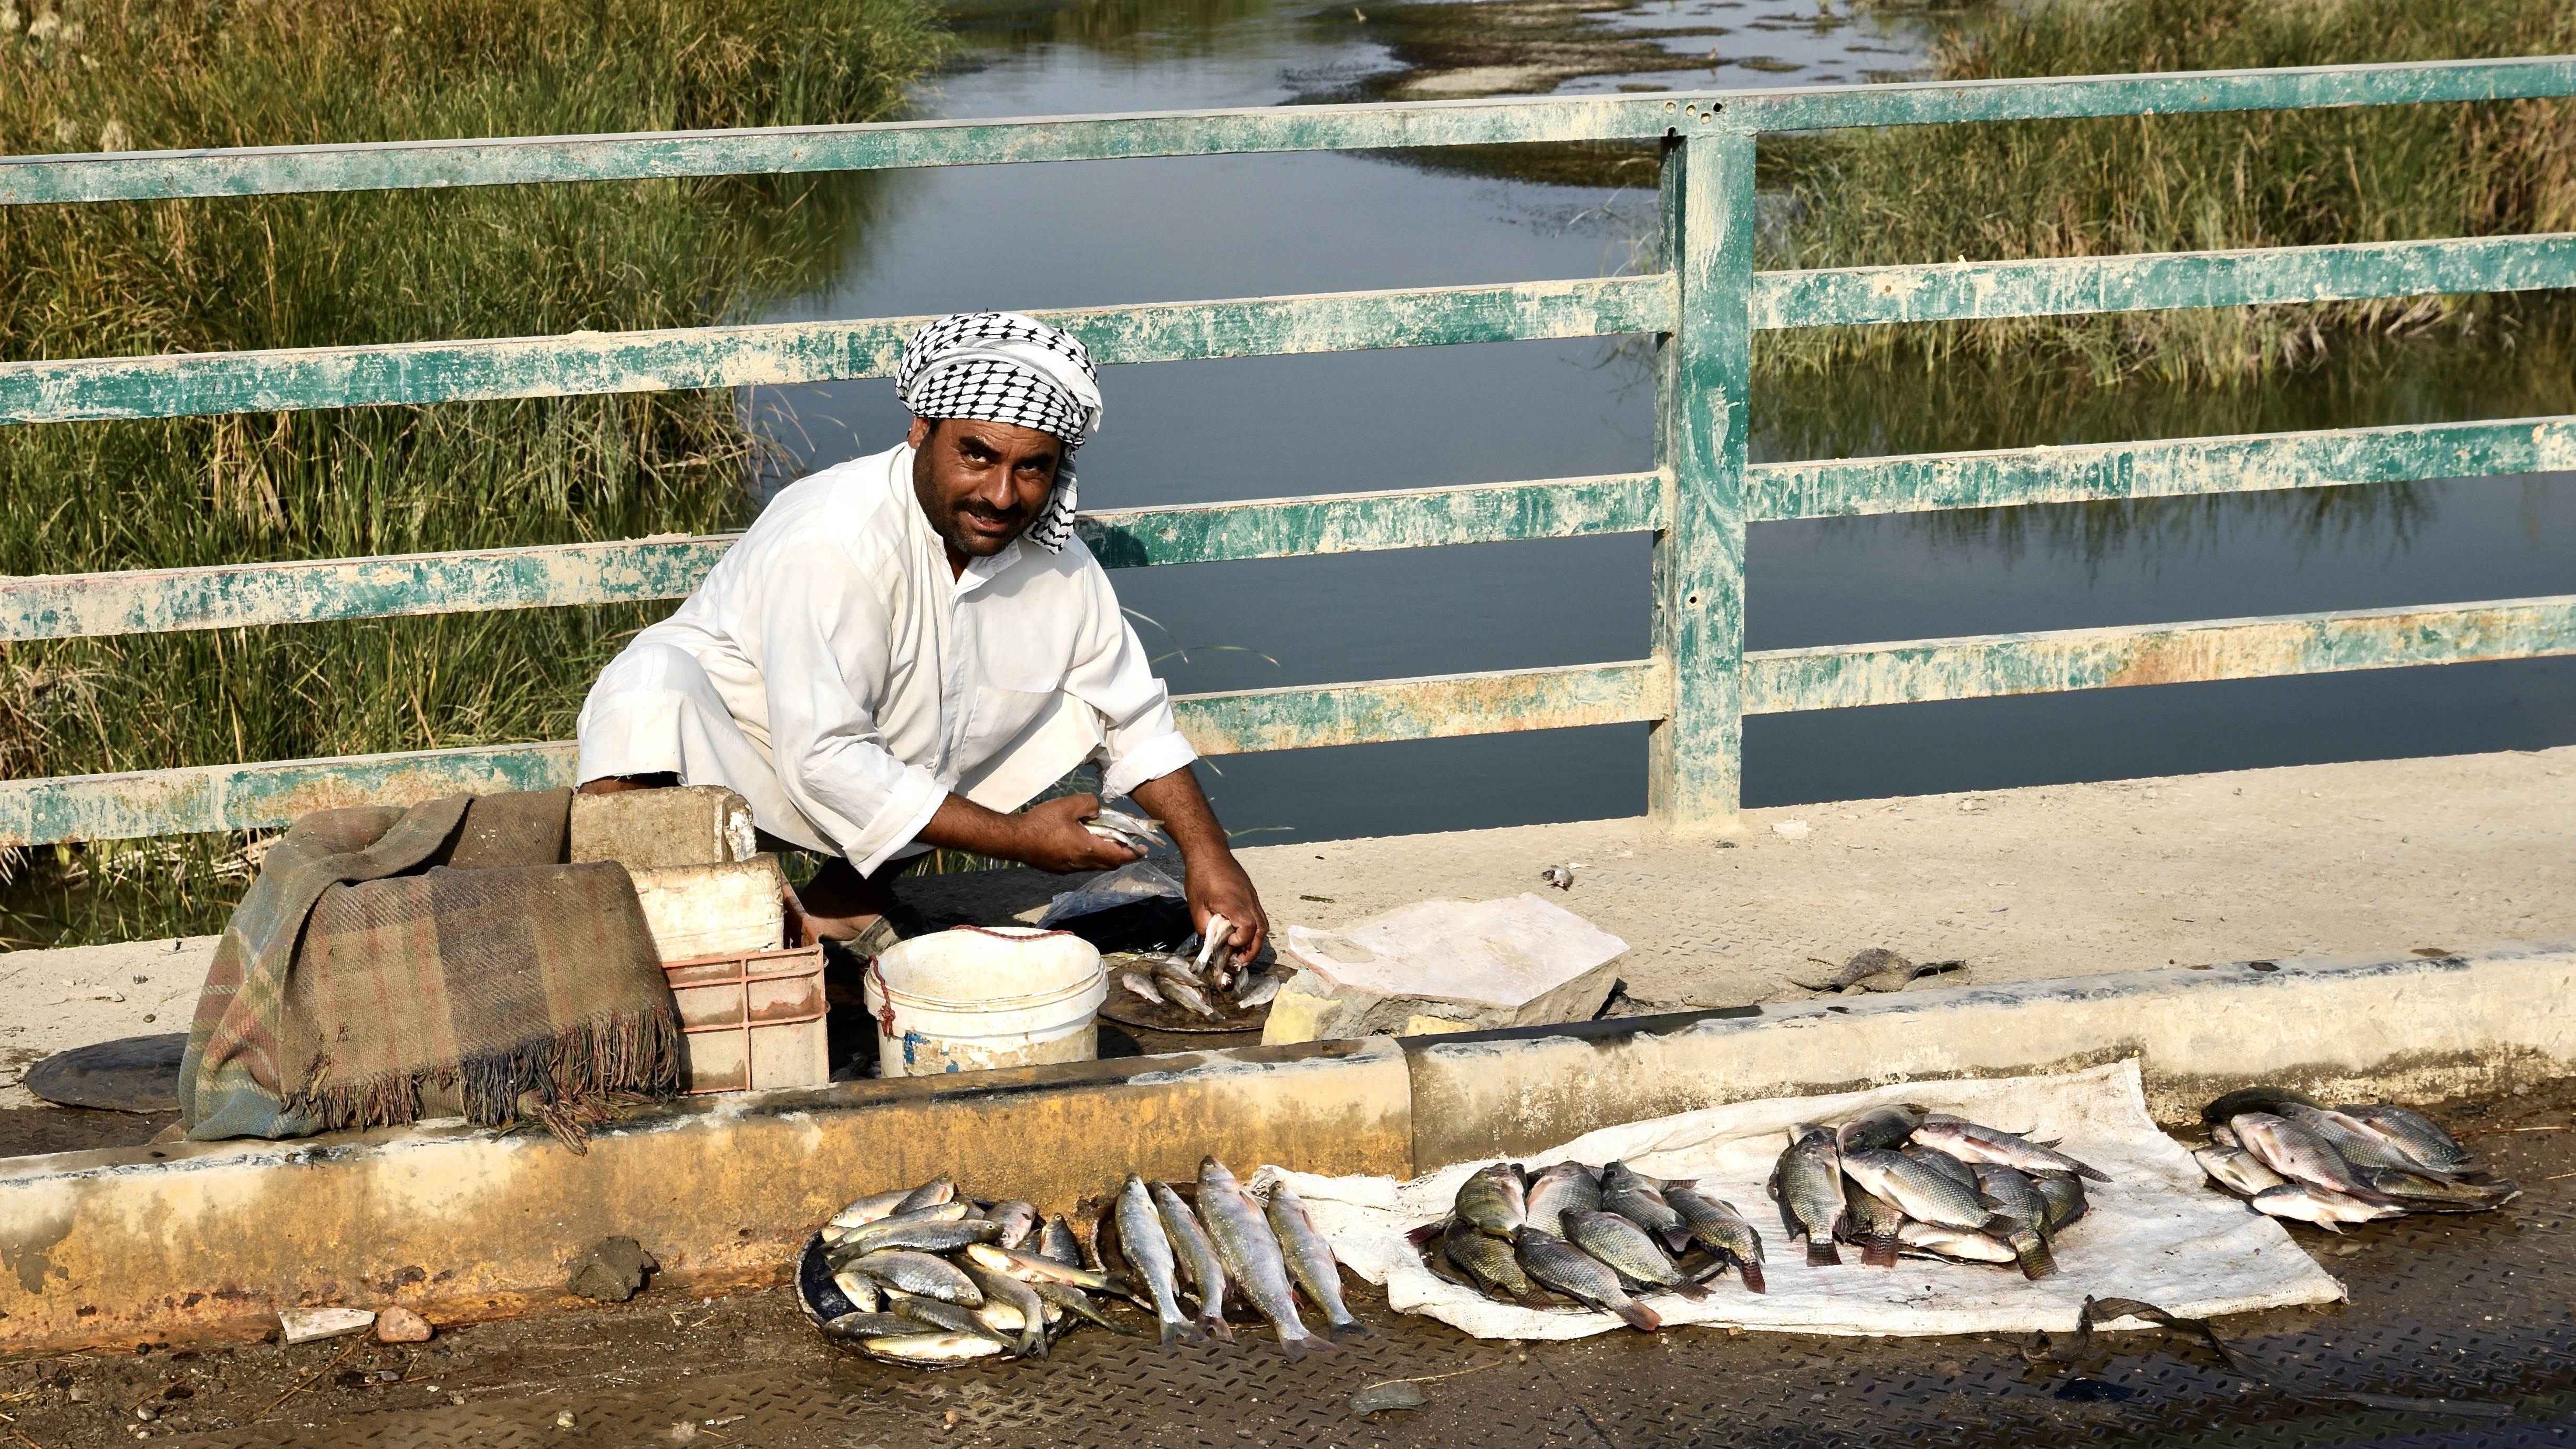 A man displays his catch of fish at the side of the road in Iraq's marsh region